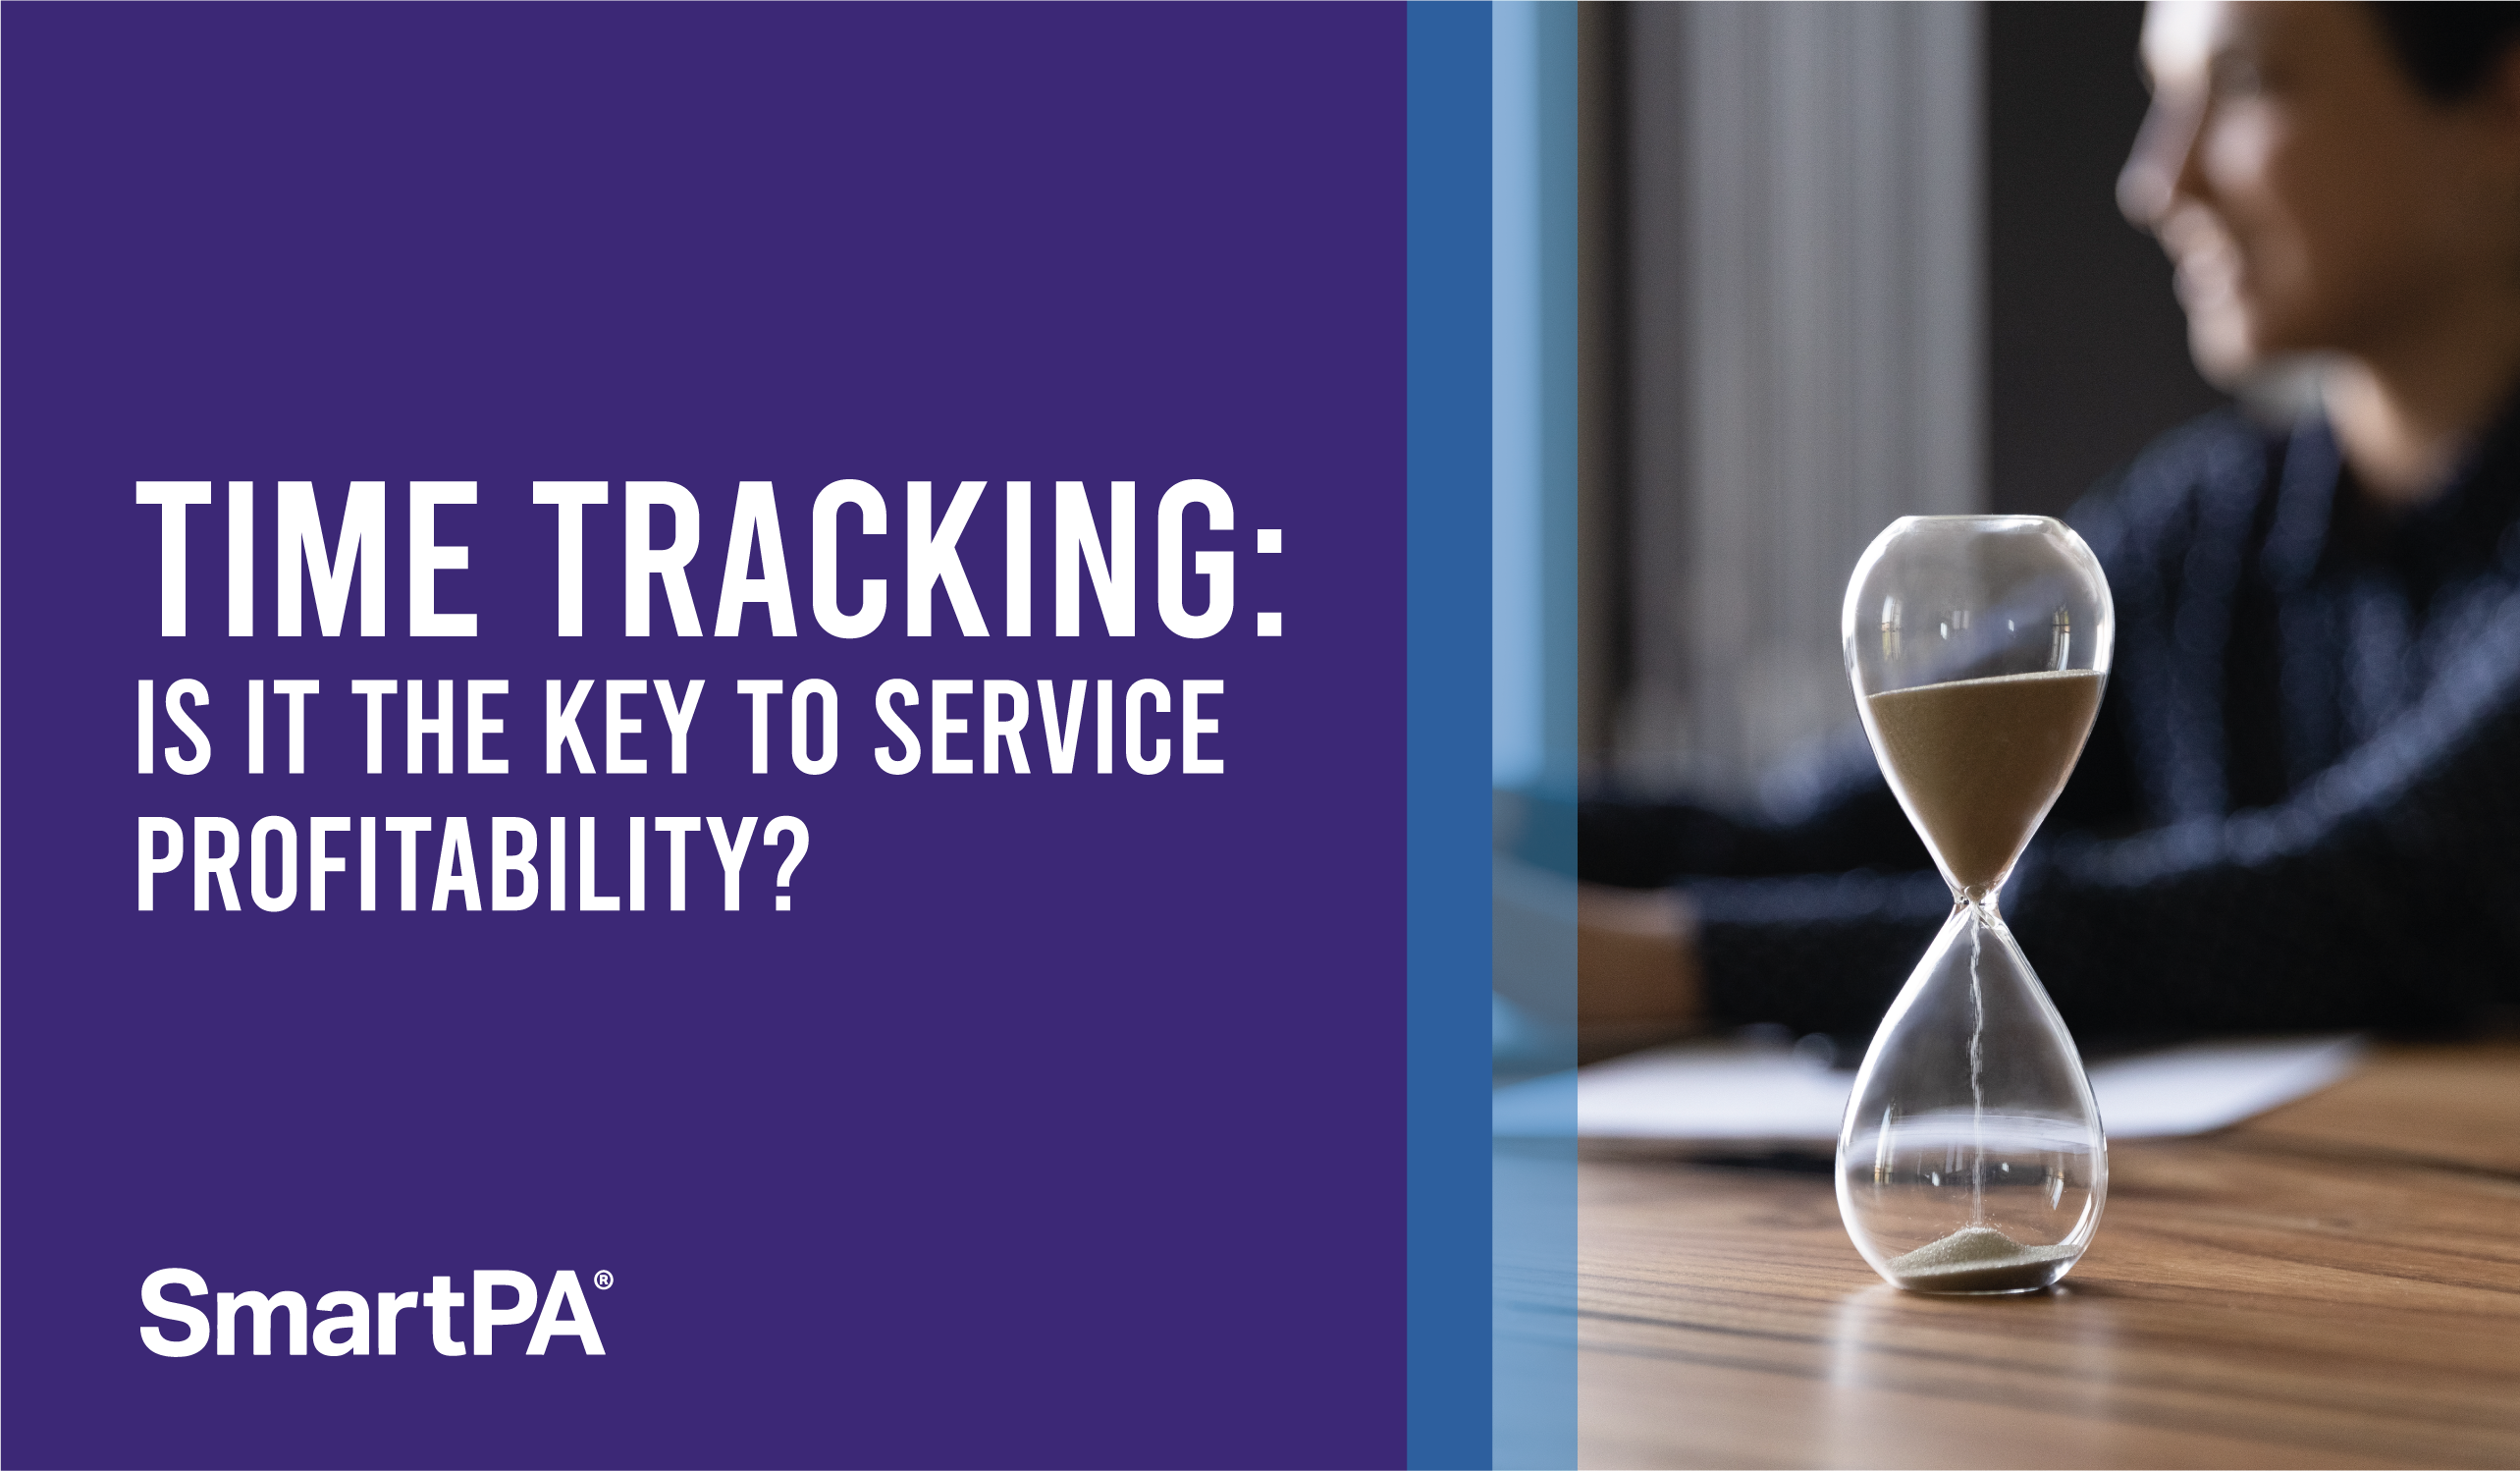 Time tracking: is it the key to service profitability?